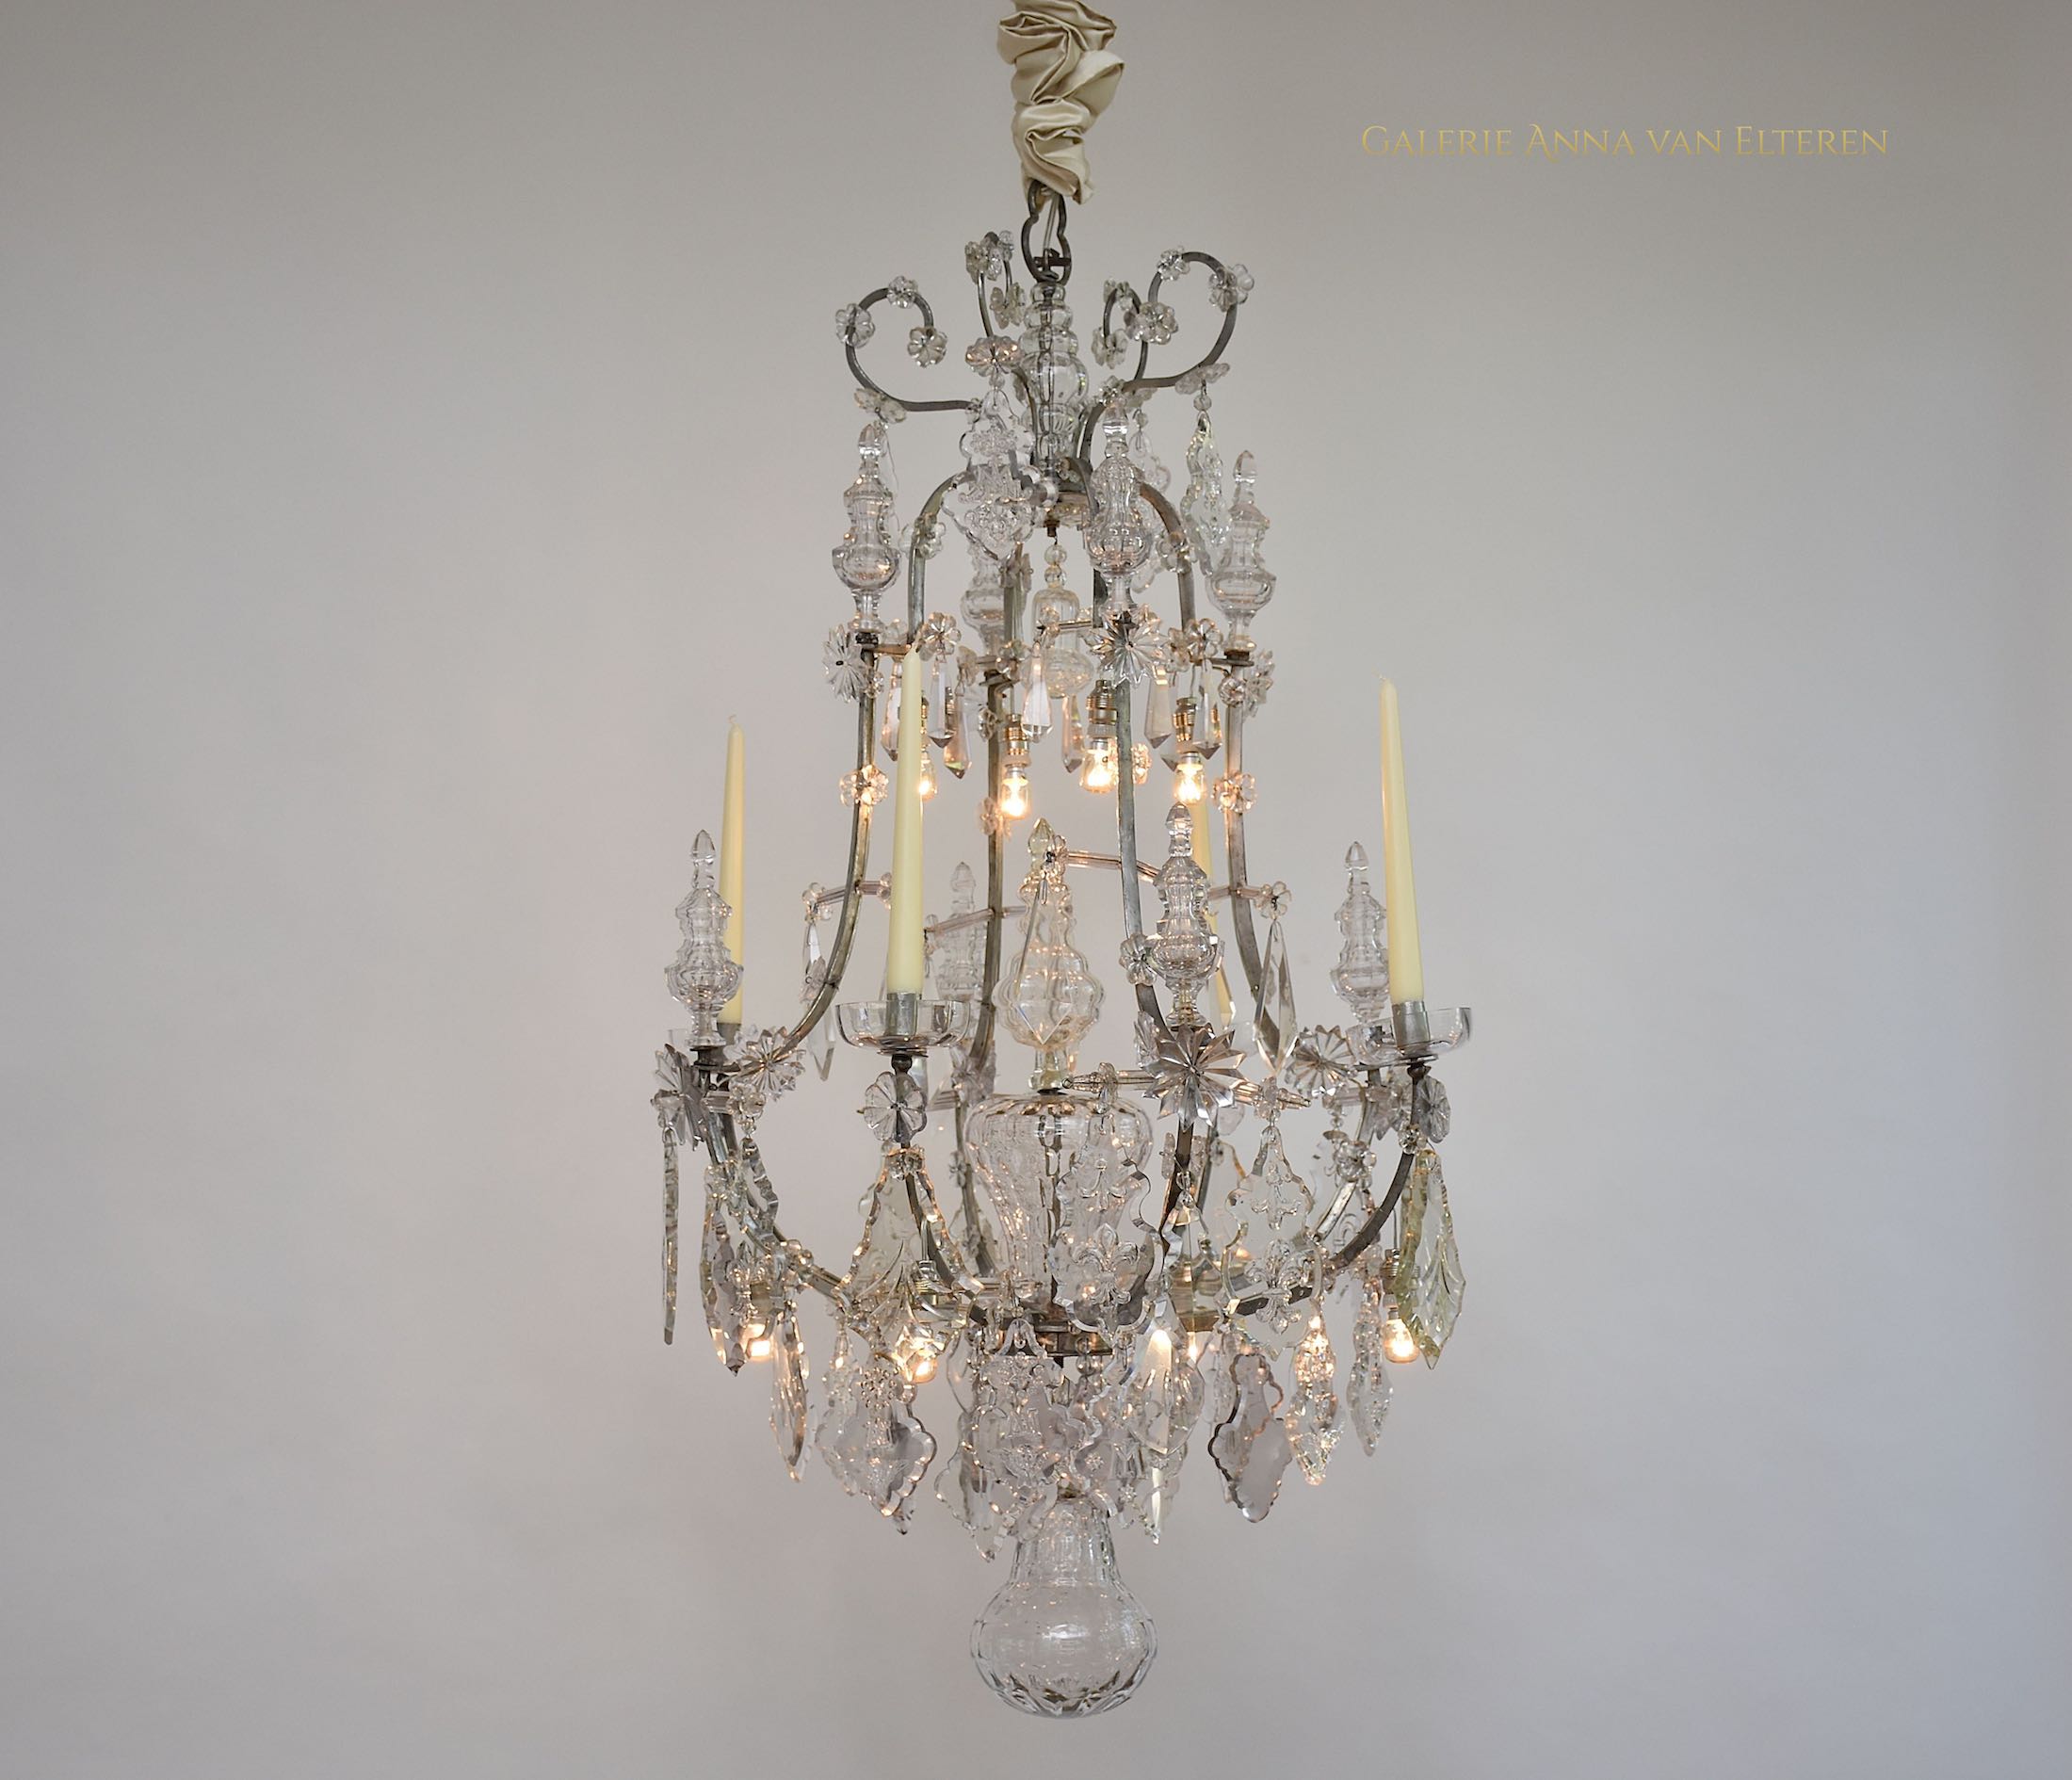 Antique cage chandelier in style of Karl VI